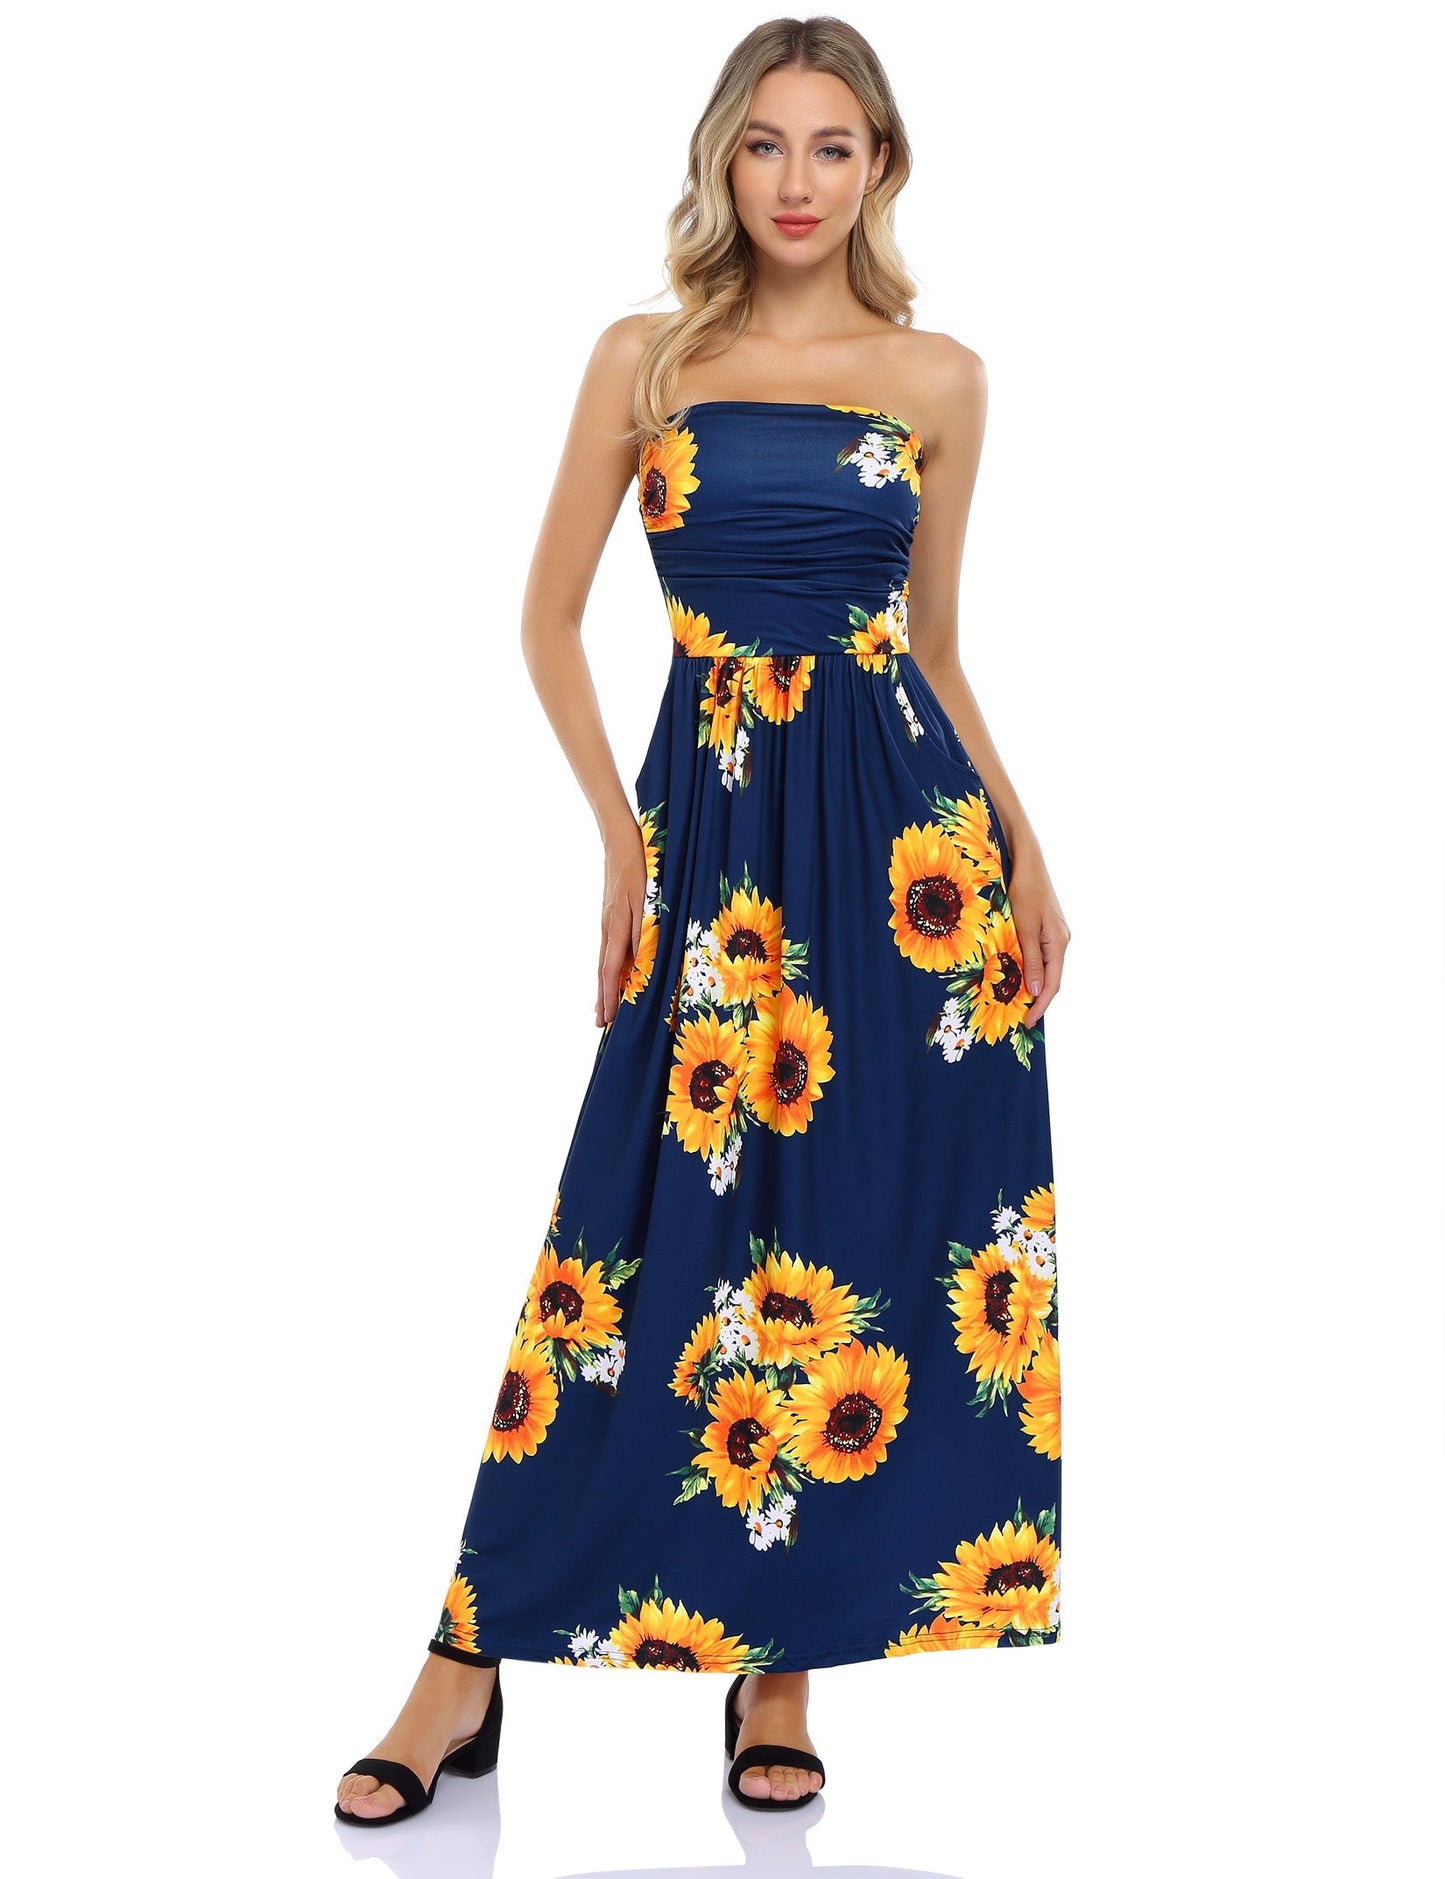 YESFASHION Women's Strapless Graceful Floral Party Maxi Long Dress Yelllow